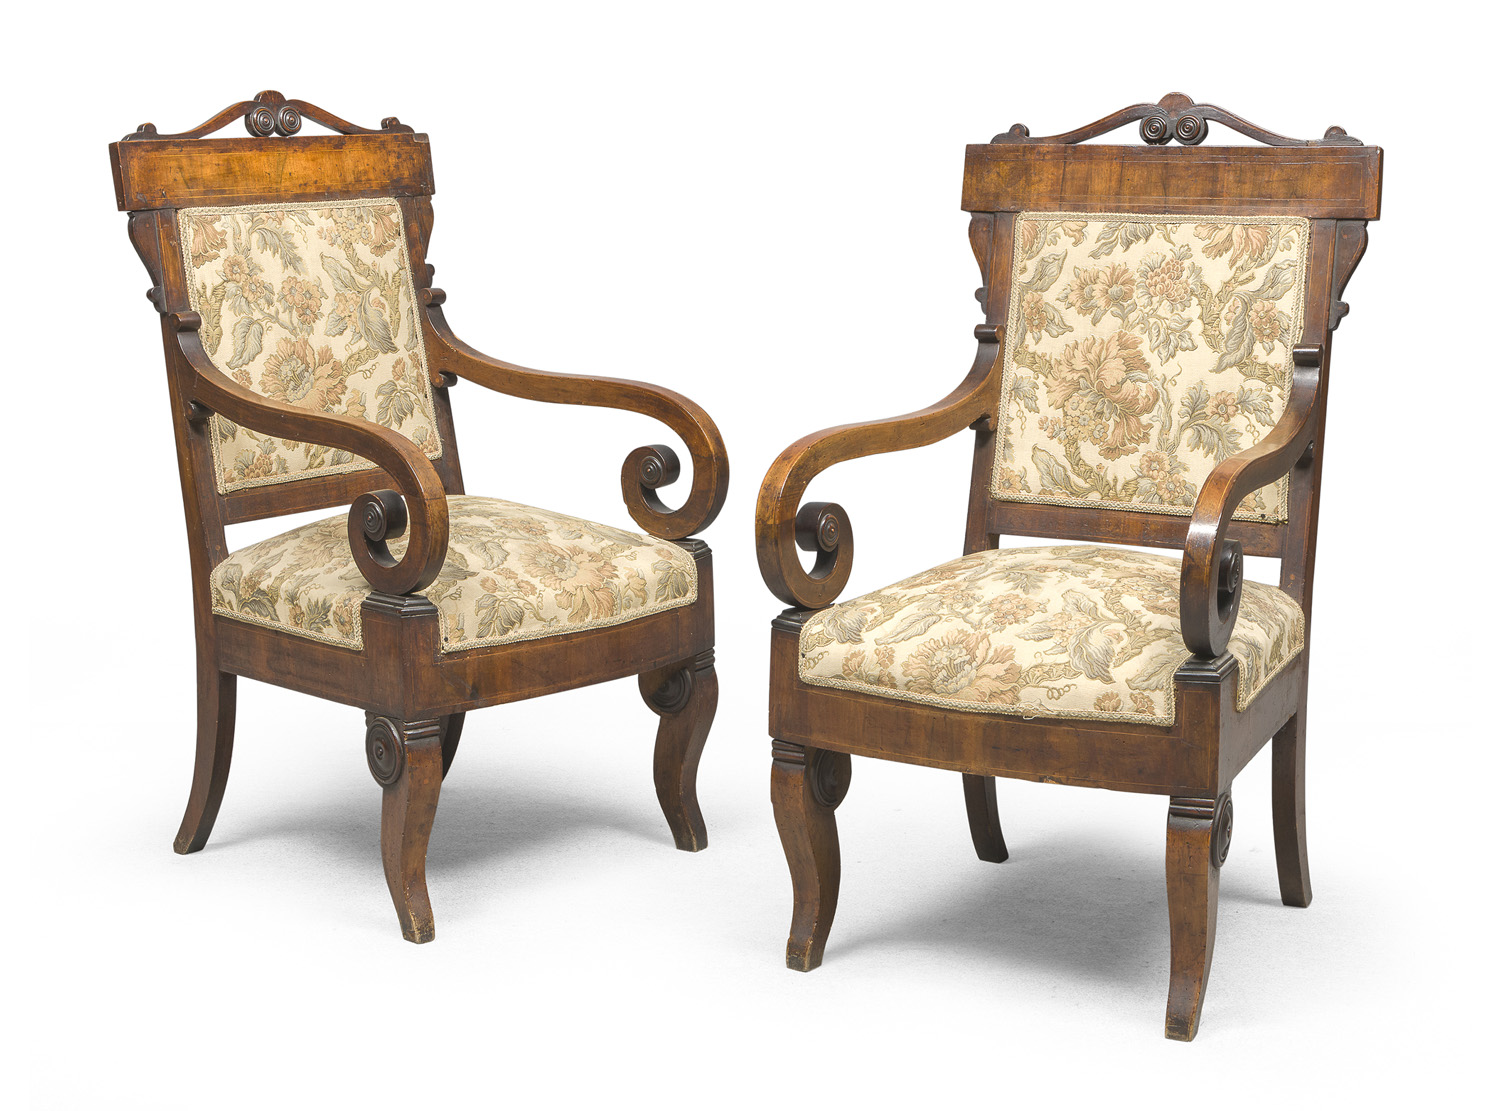 PAIR OF WALNUT ARMCHAIRS CENTRAL ITALY 19th CENTURY